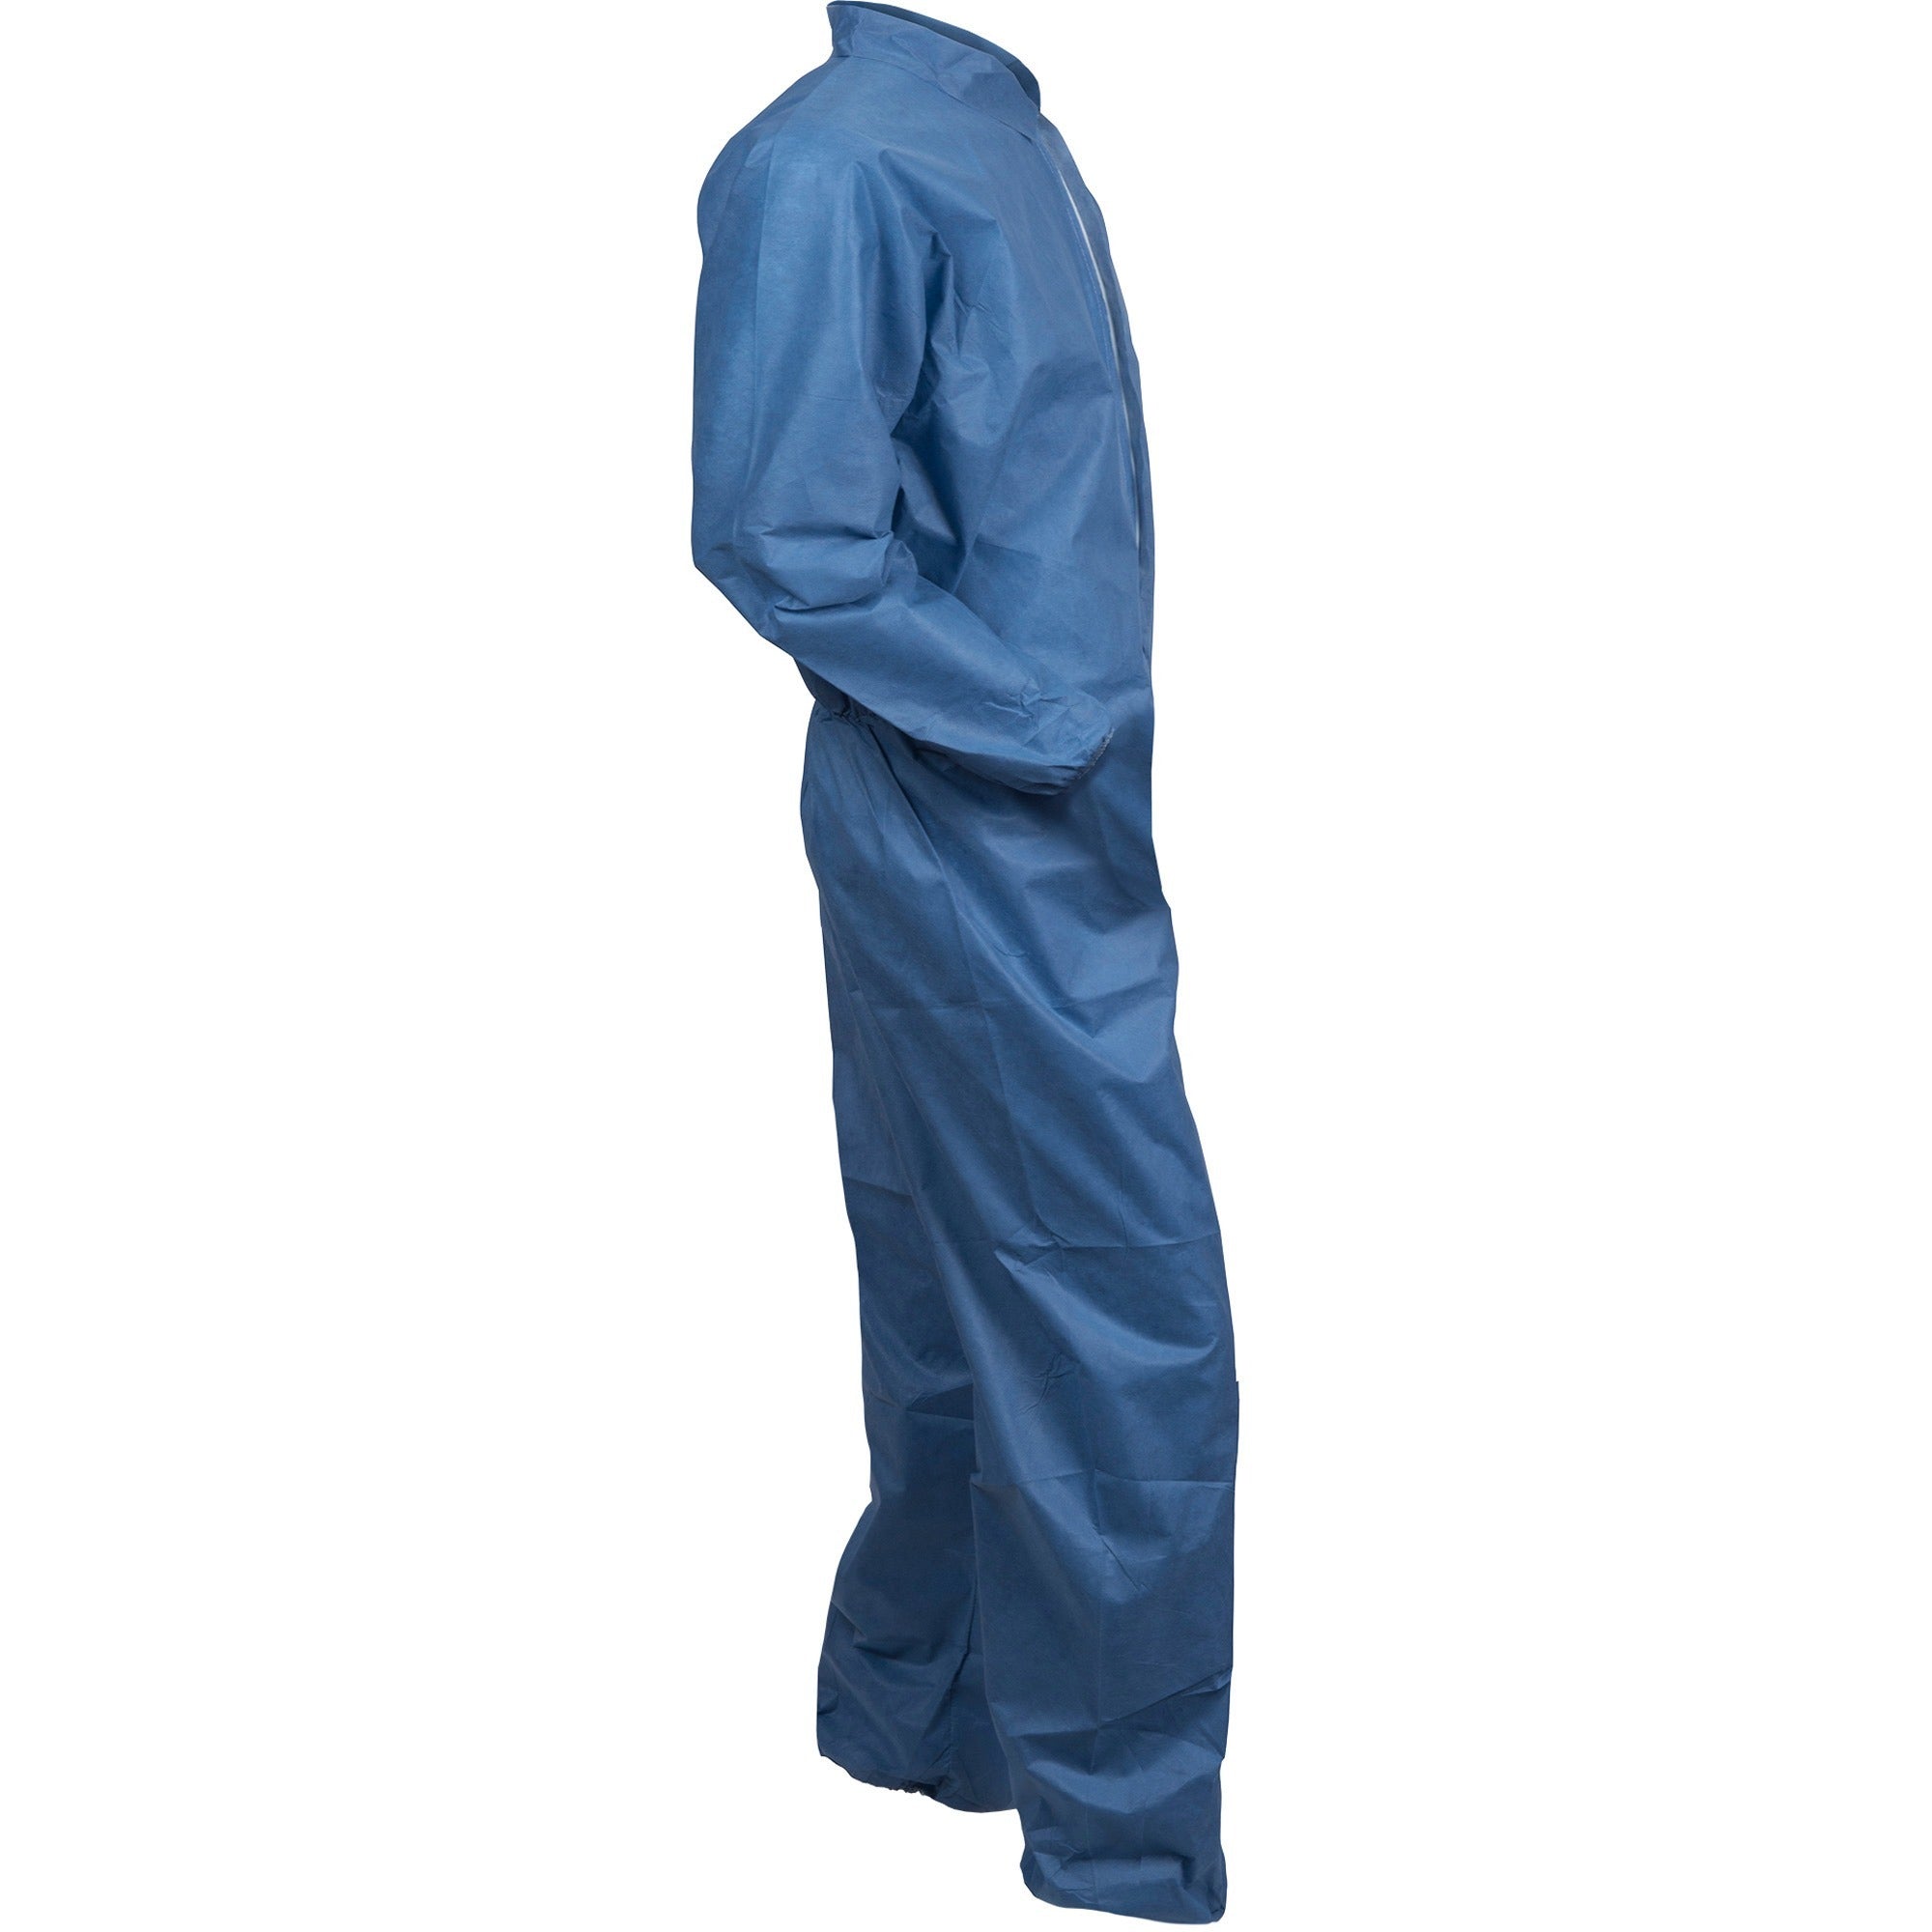 Kleenguard A20 Coveralls - Zipper Front, Elastic Back, Wrists & Ankles - Large Size - Flying Particle, Contaminant, Dust Protection - Blue - Zipper Front, Elastic Wrist & Ankle, Breathable, Comfortable - 24 / Carton - 